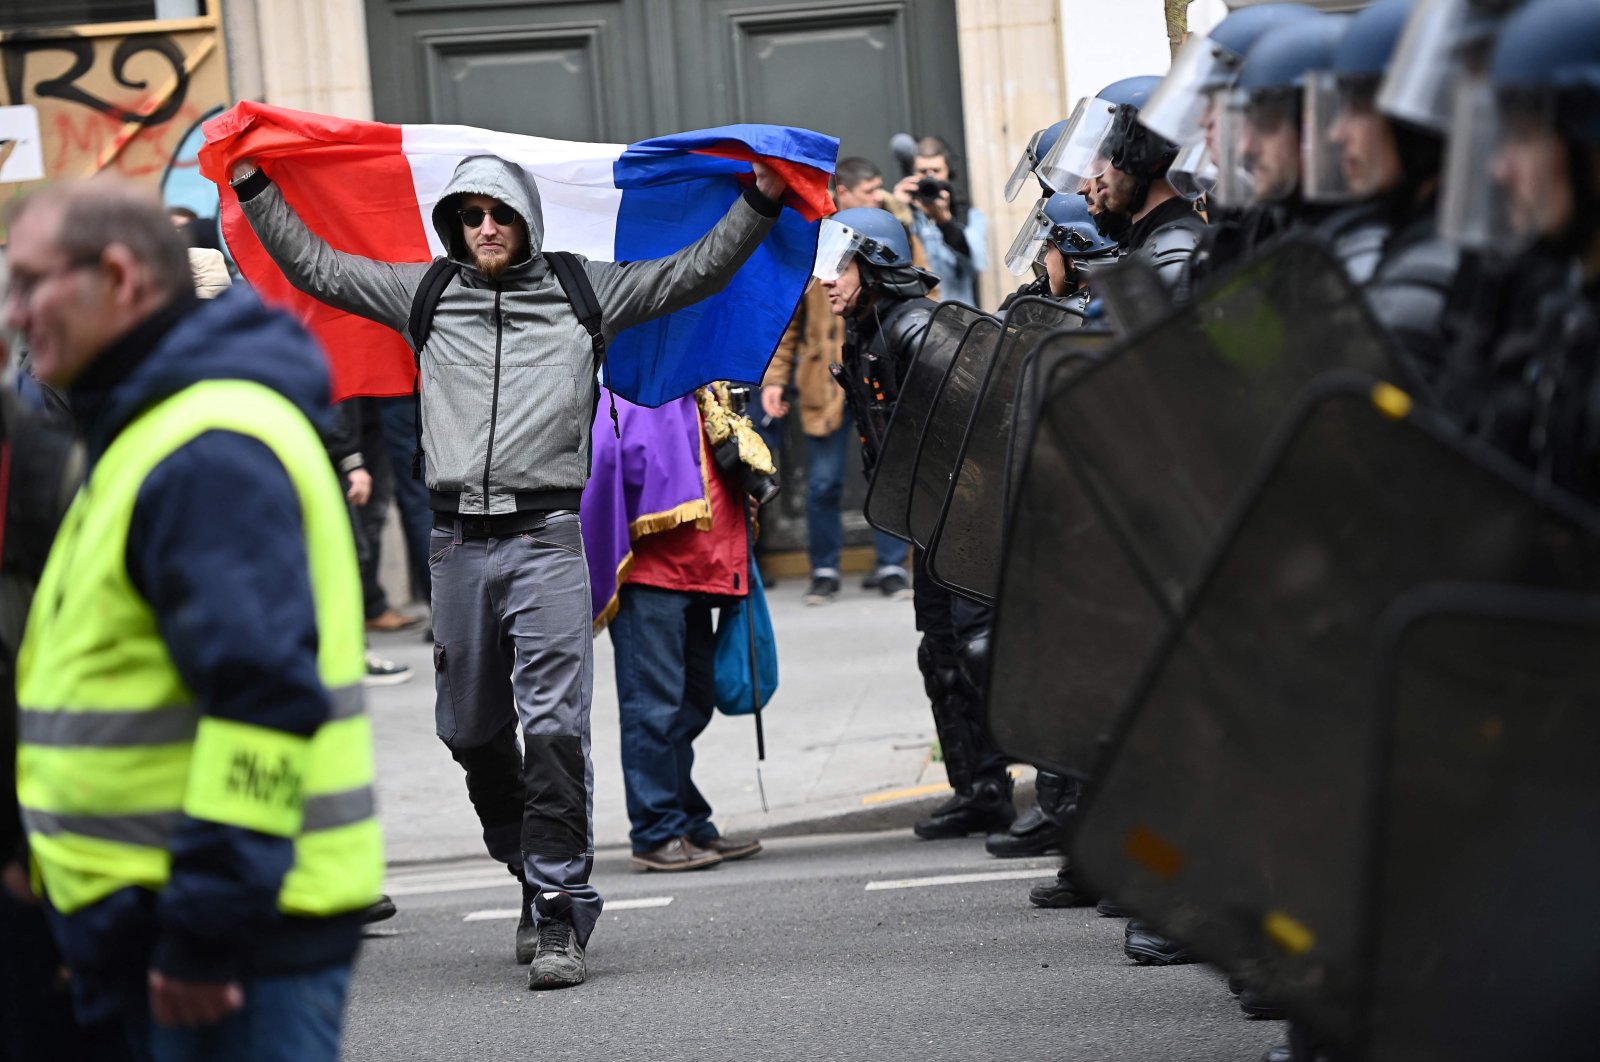 A protester holds a French flag as he walks in front of a line of gendarmes in riot gear during a demonstration after the government pushed a pensions reform through parliament without a vote, Paris, France, March 28, 2023. (AFP Photo)